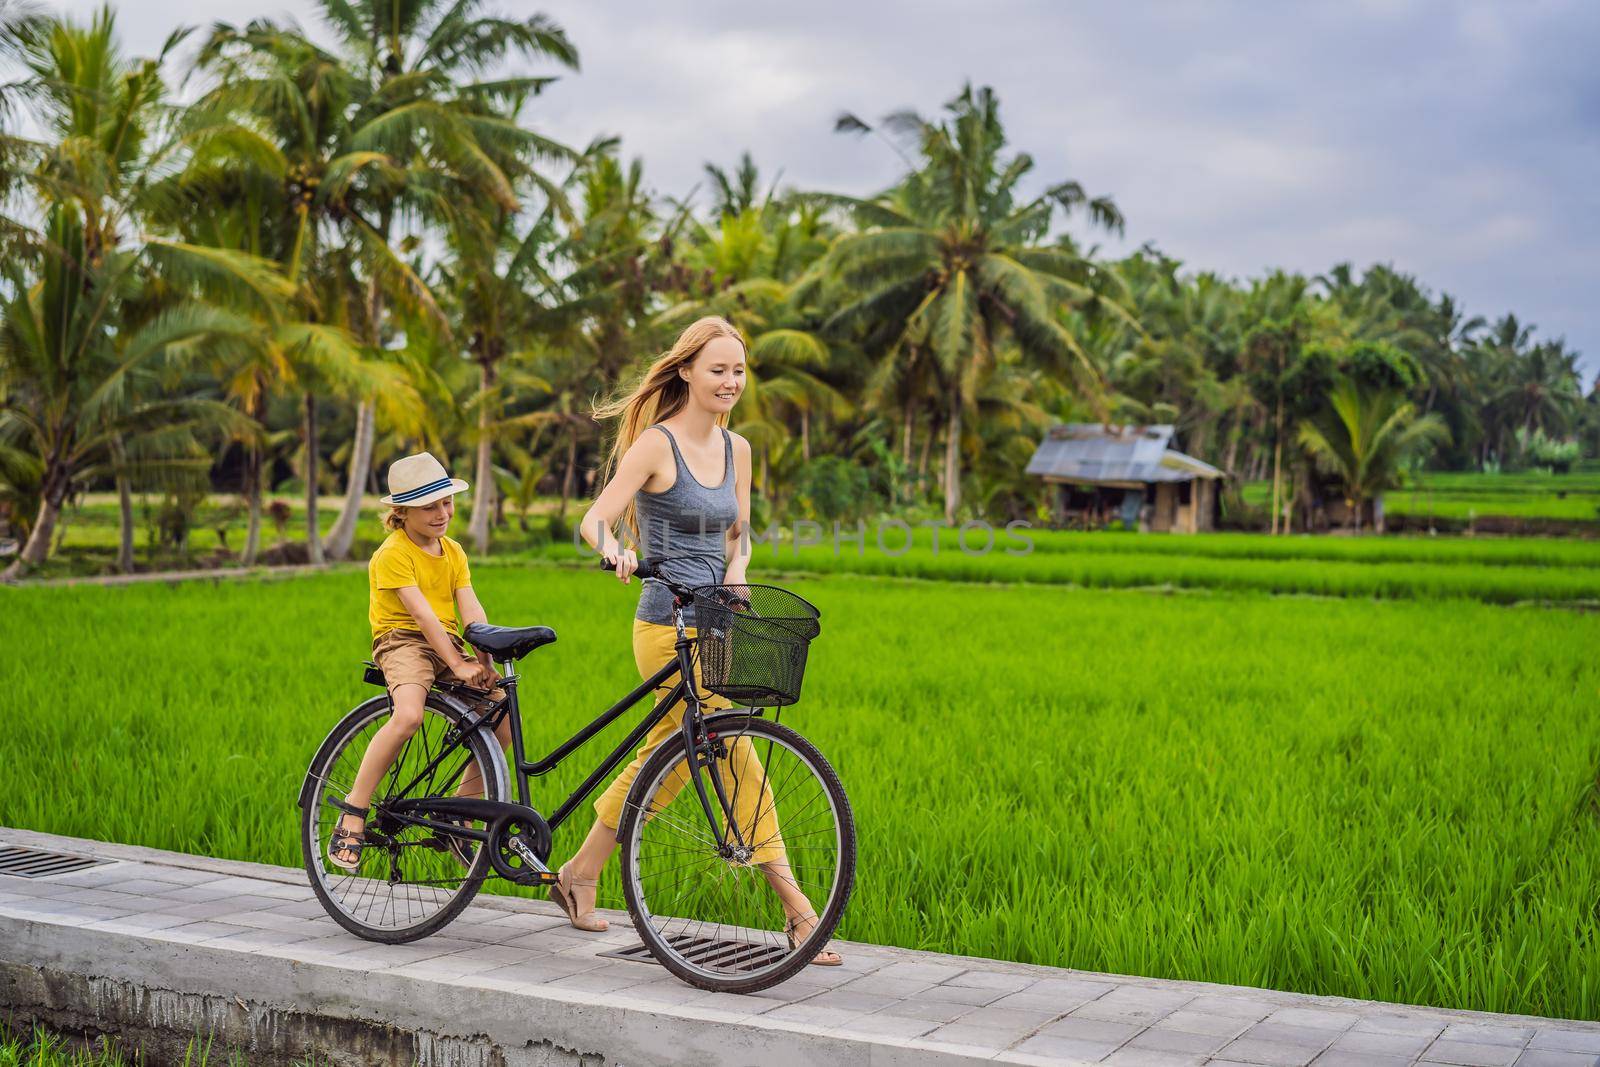 Mother and son ride a bicycle on a rice field in Ubud, Bali. Travel to Bali with kids concept by galitskaya